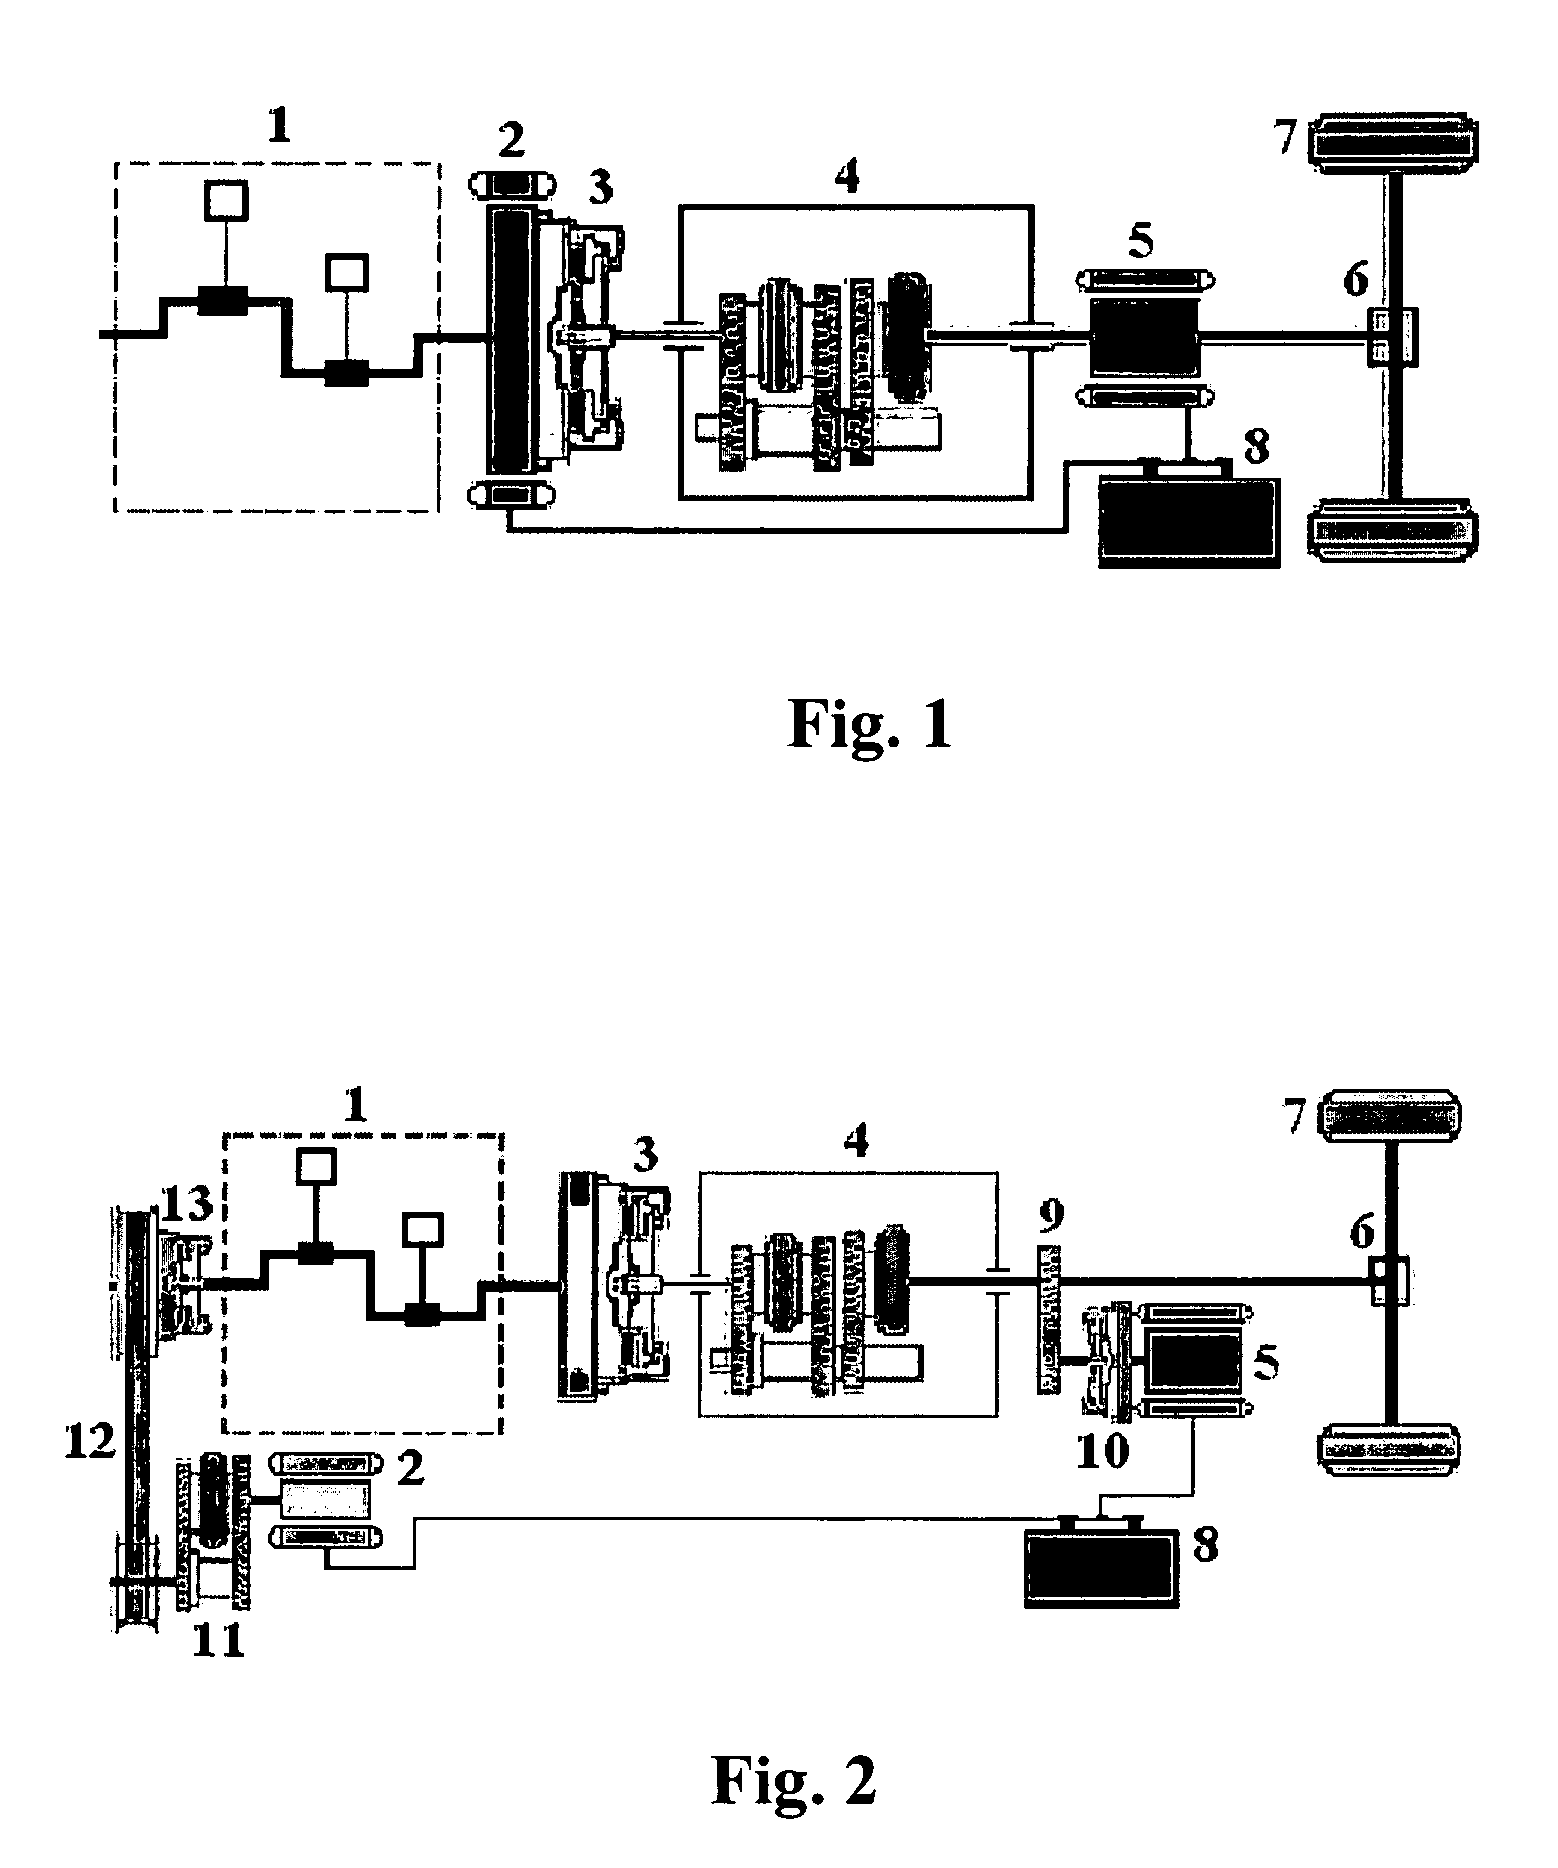 Power system for dual-motor hybrid vehicle